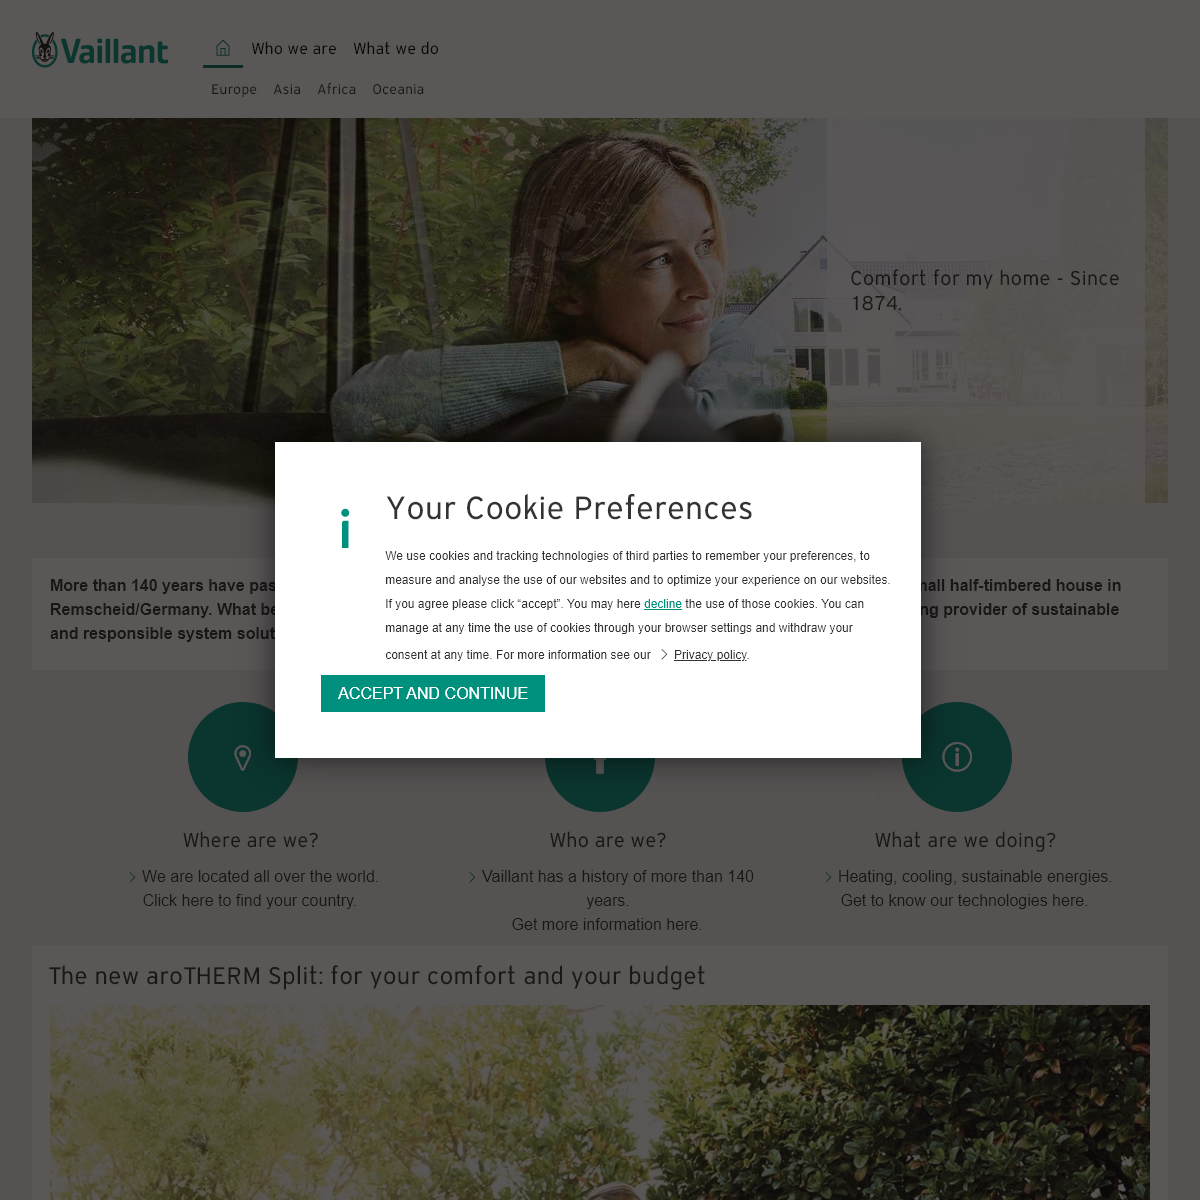 A complete backup of vaillant.com